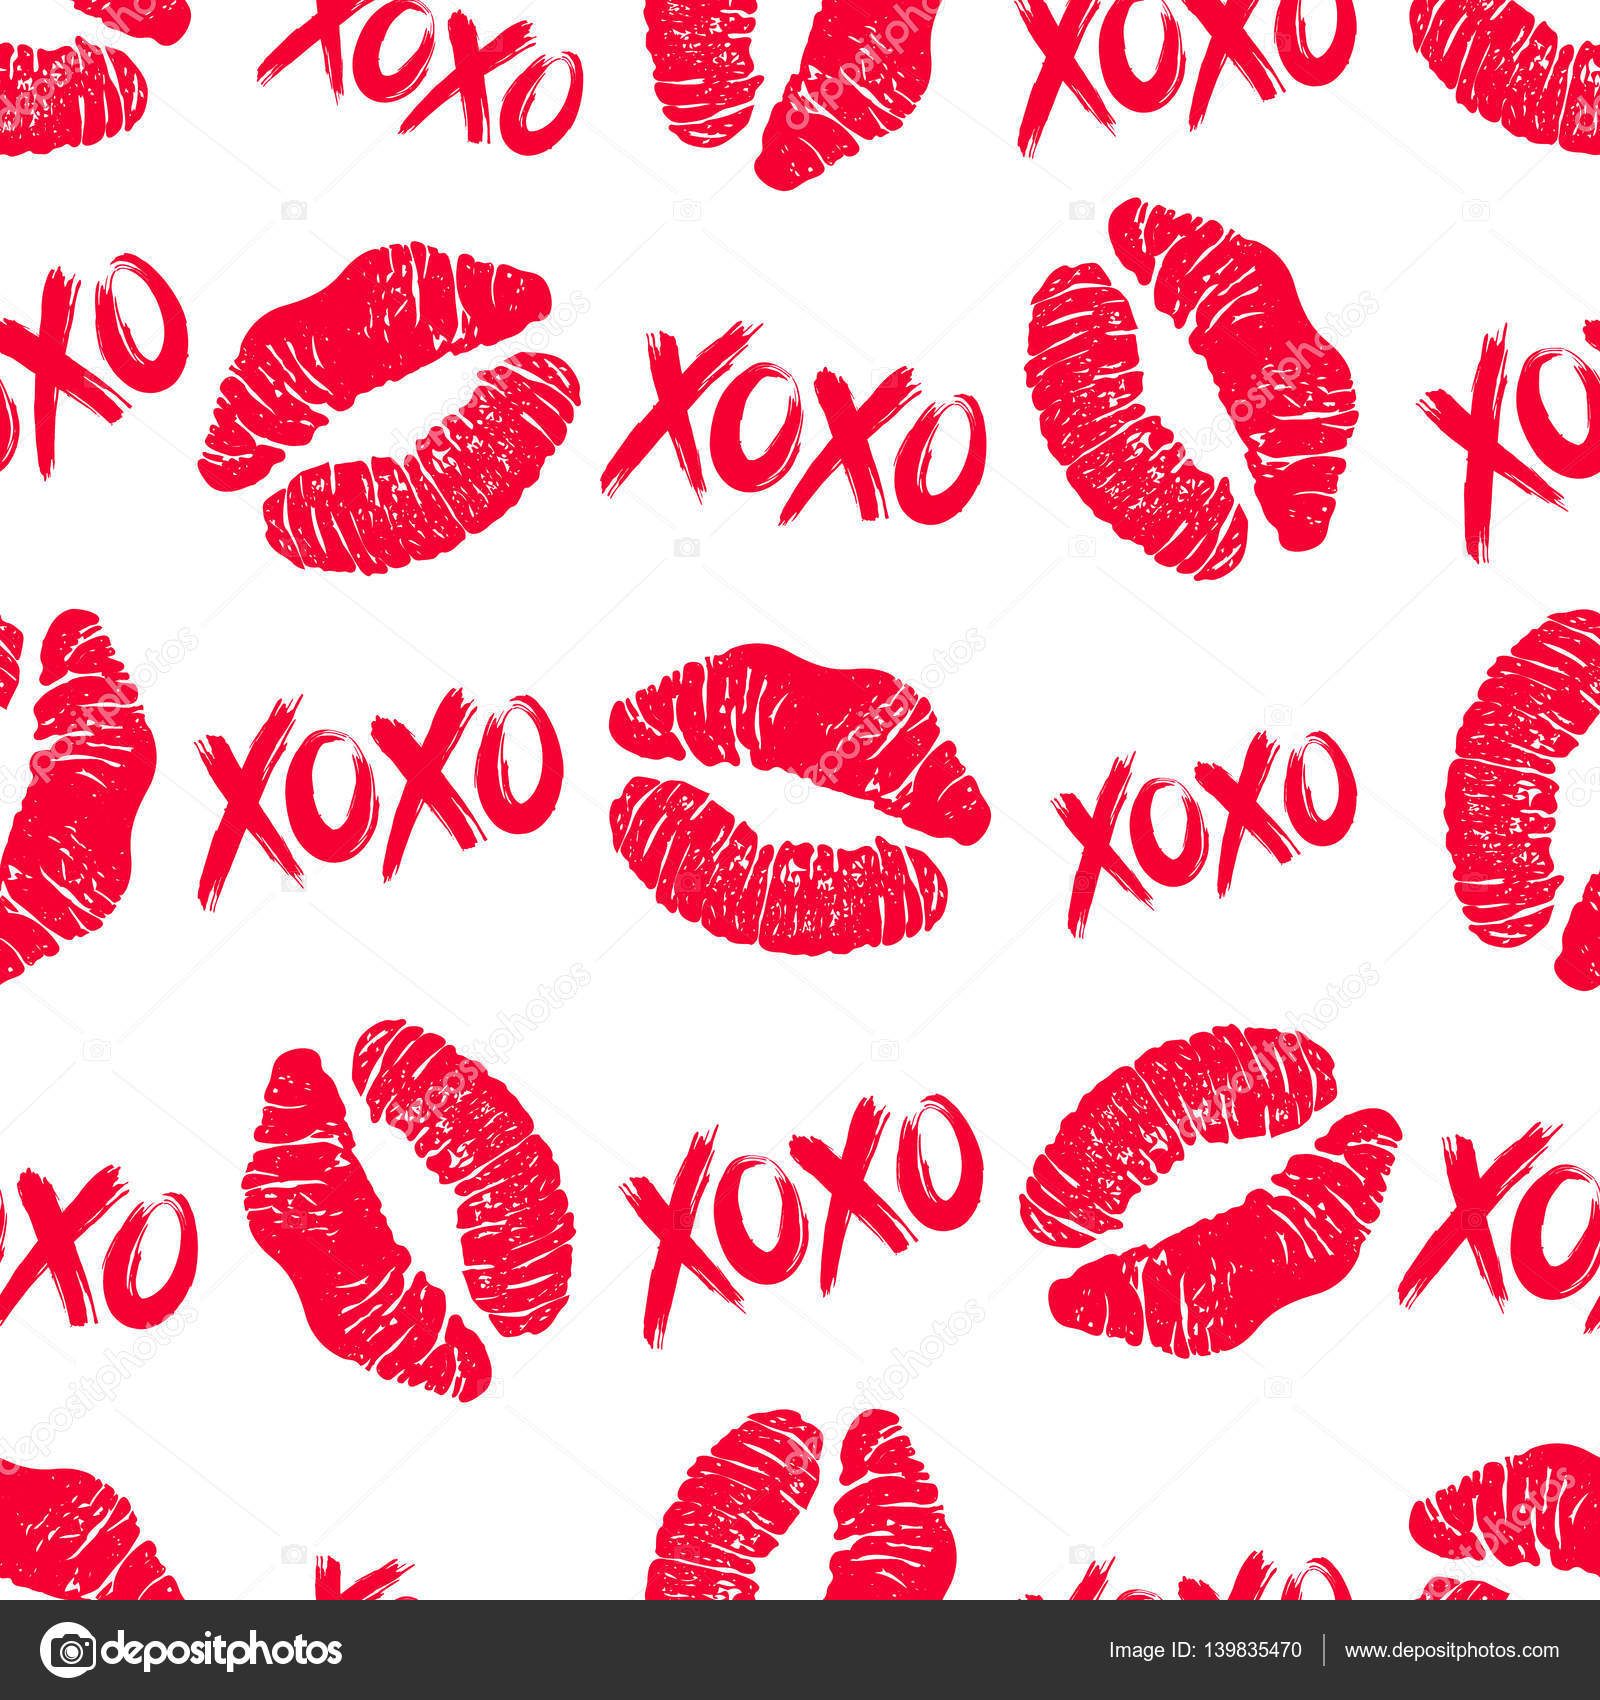 Xoxo And Lipstick Kiss Seamless Pattern Stock Vector Image By © 139835470